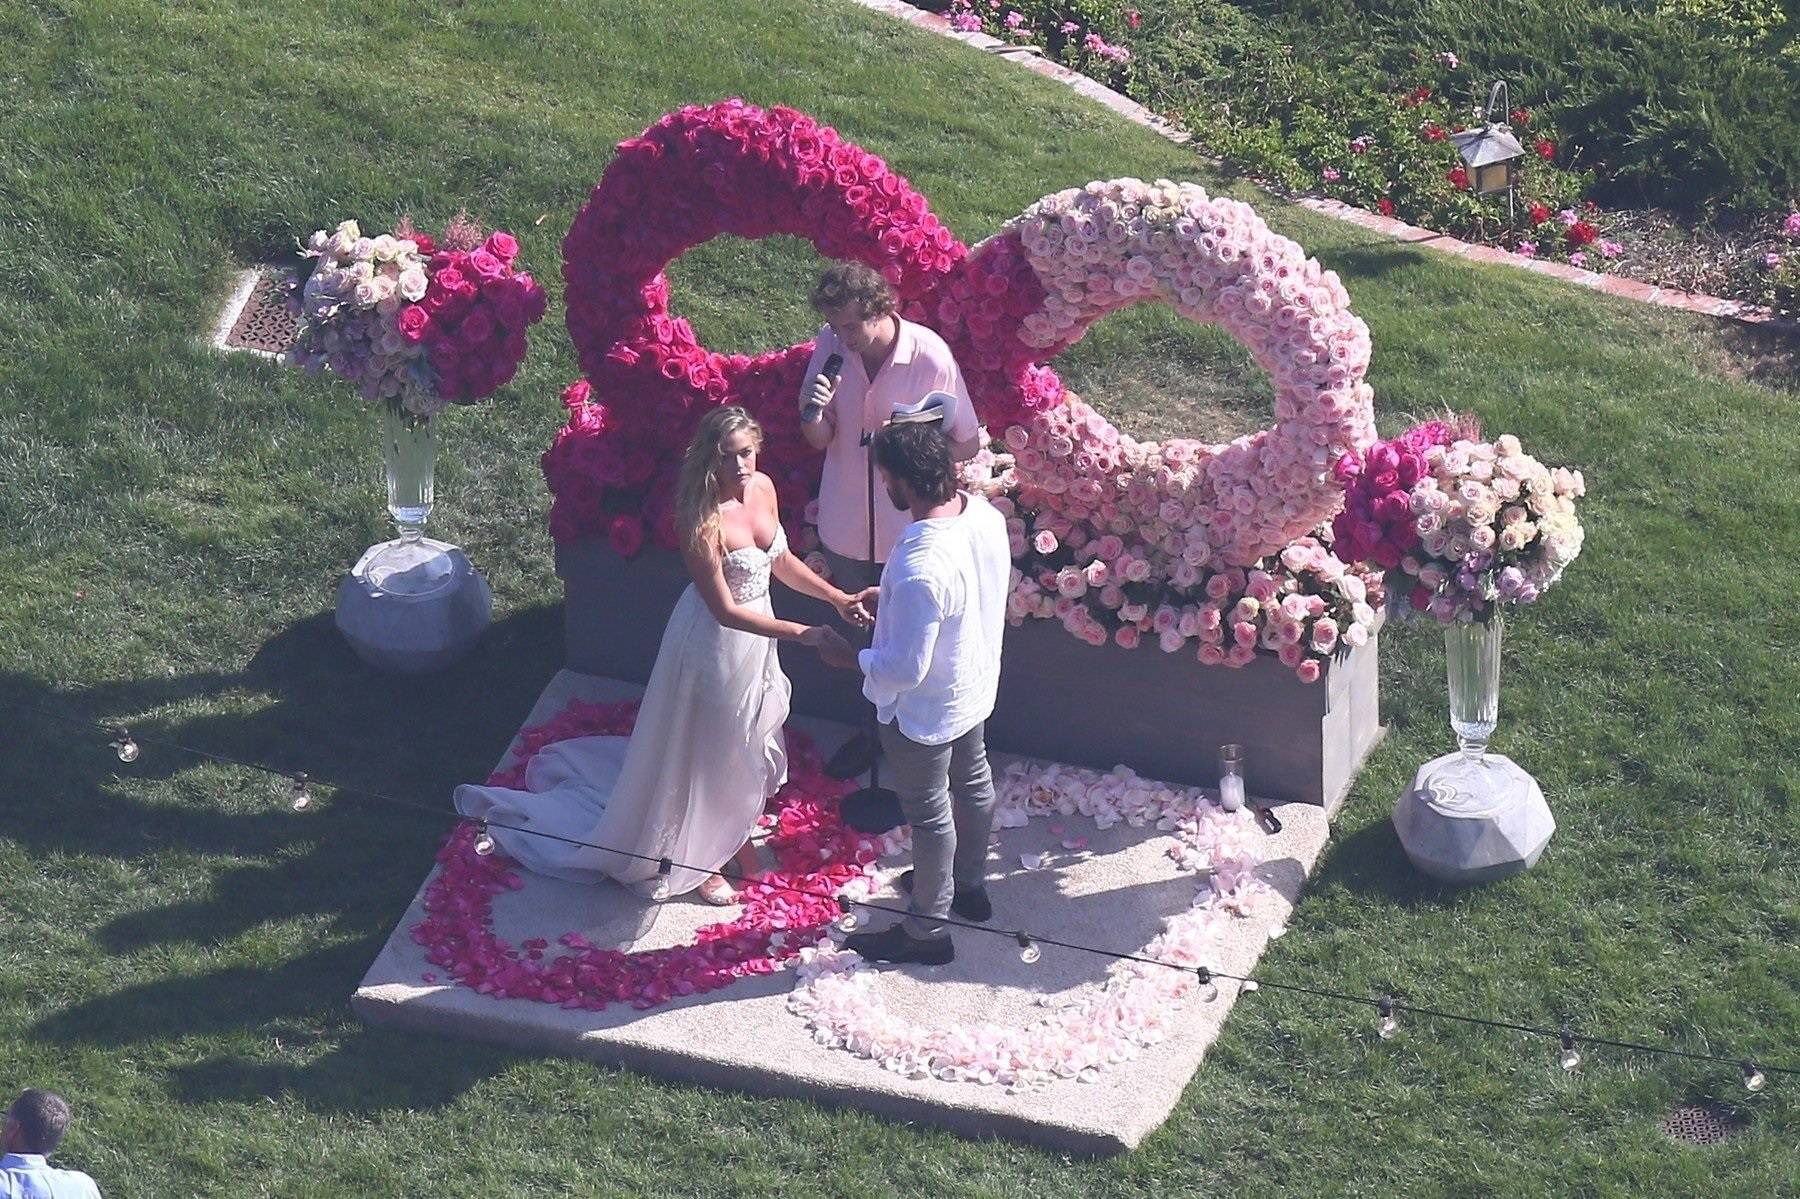 *EXCLUSIVE* Wedding bells! Denise Richards and Aaron Phypers tie the knot in a small ceremony